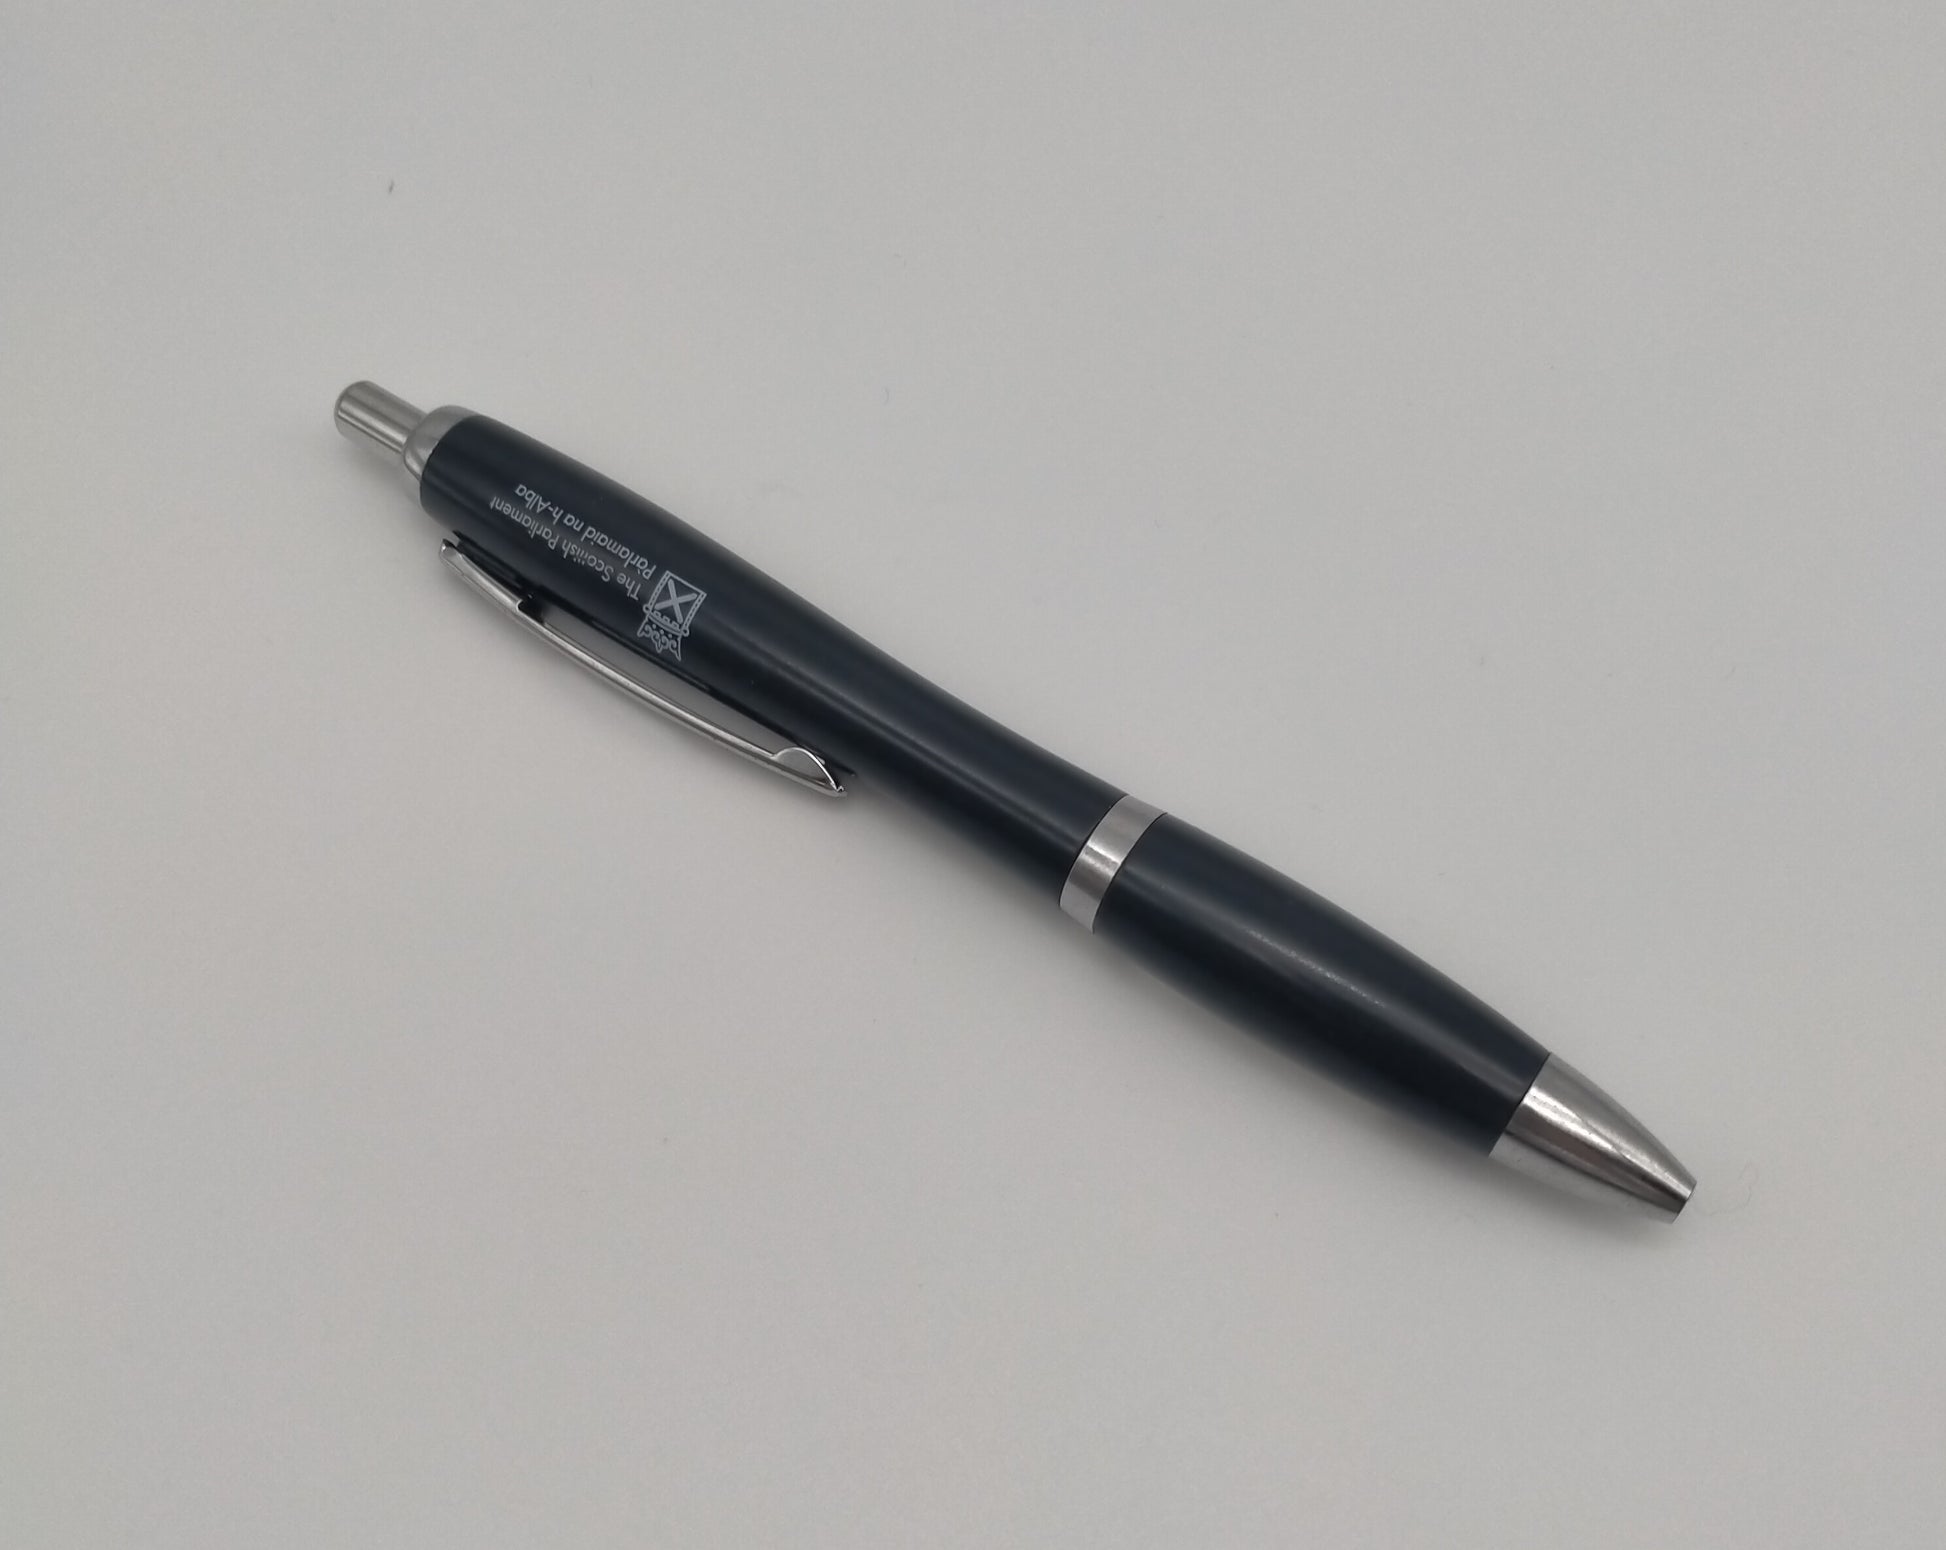 Black pen decorated with the symbol of the Scottish Parliament with silver elements.